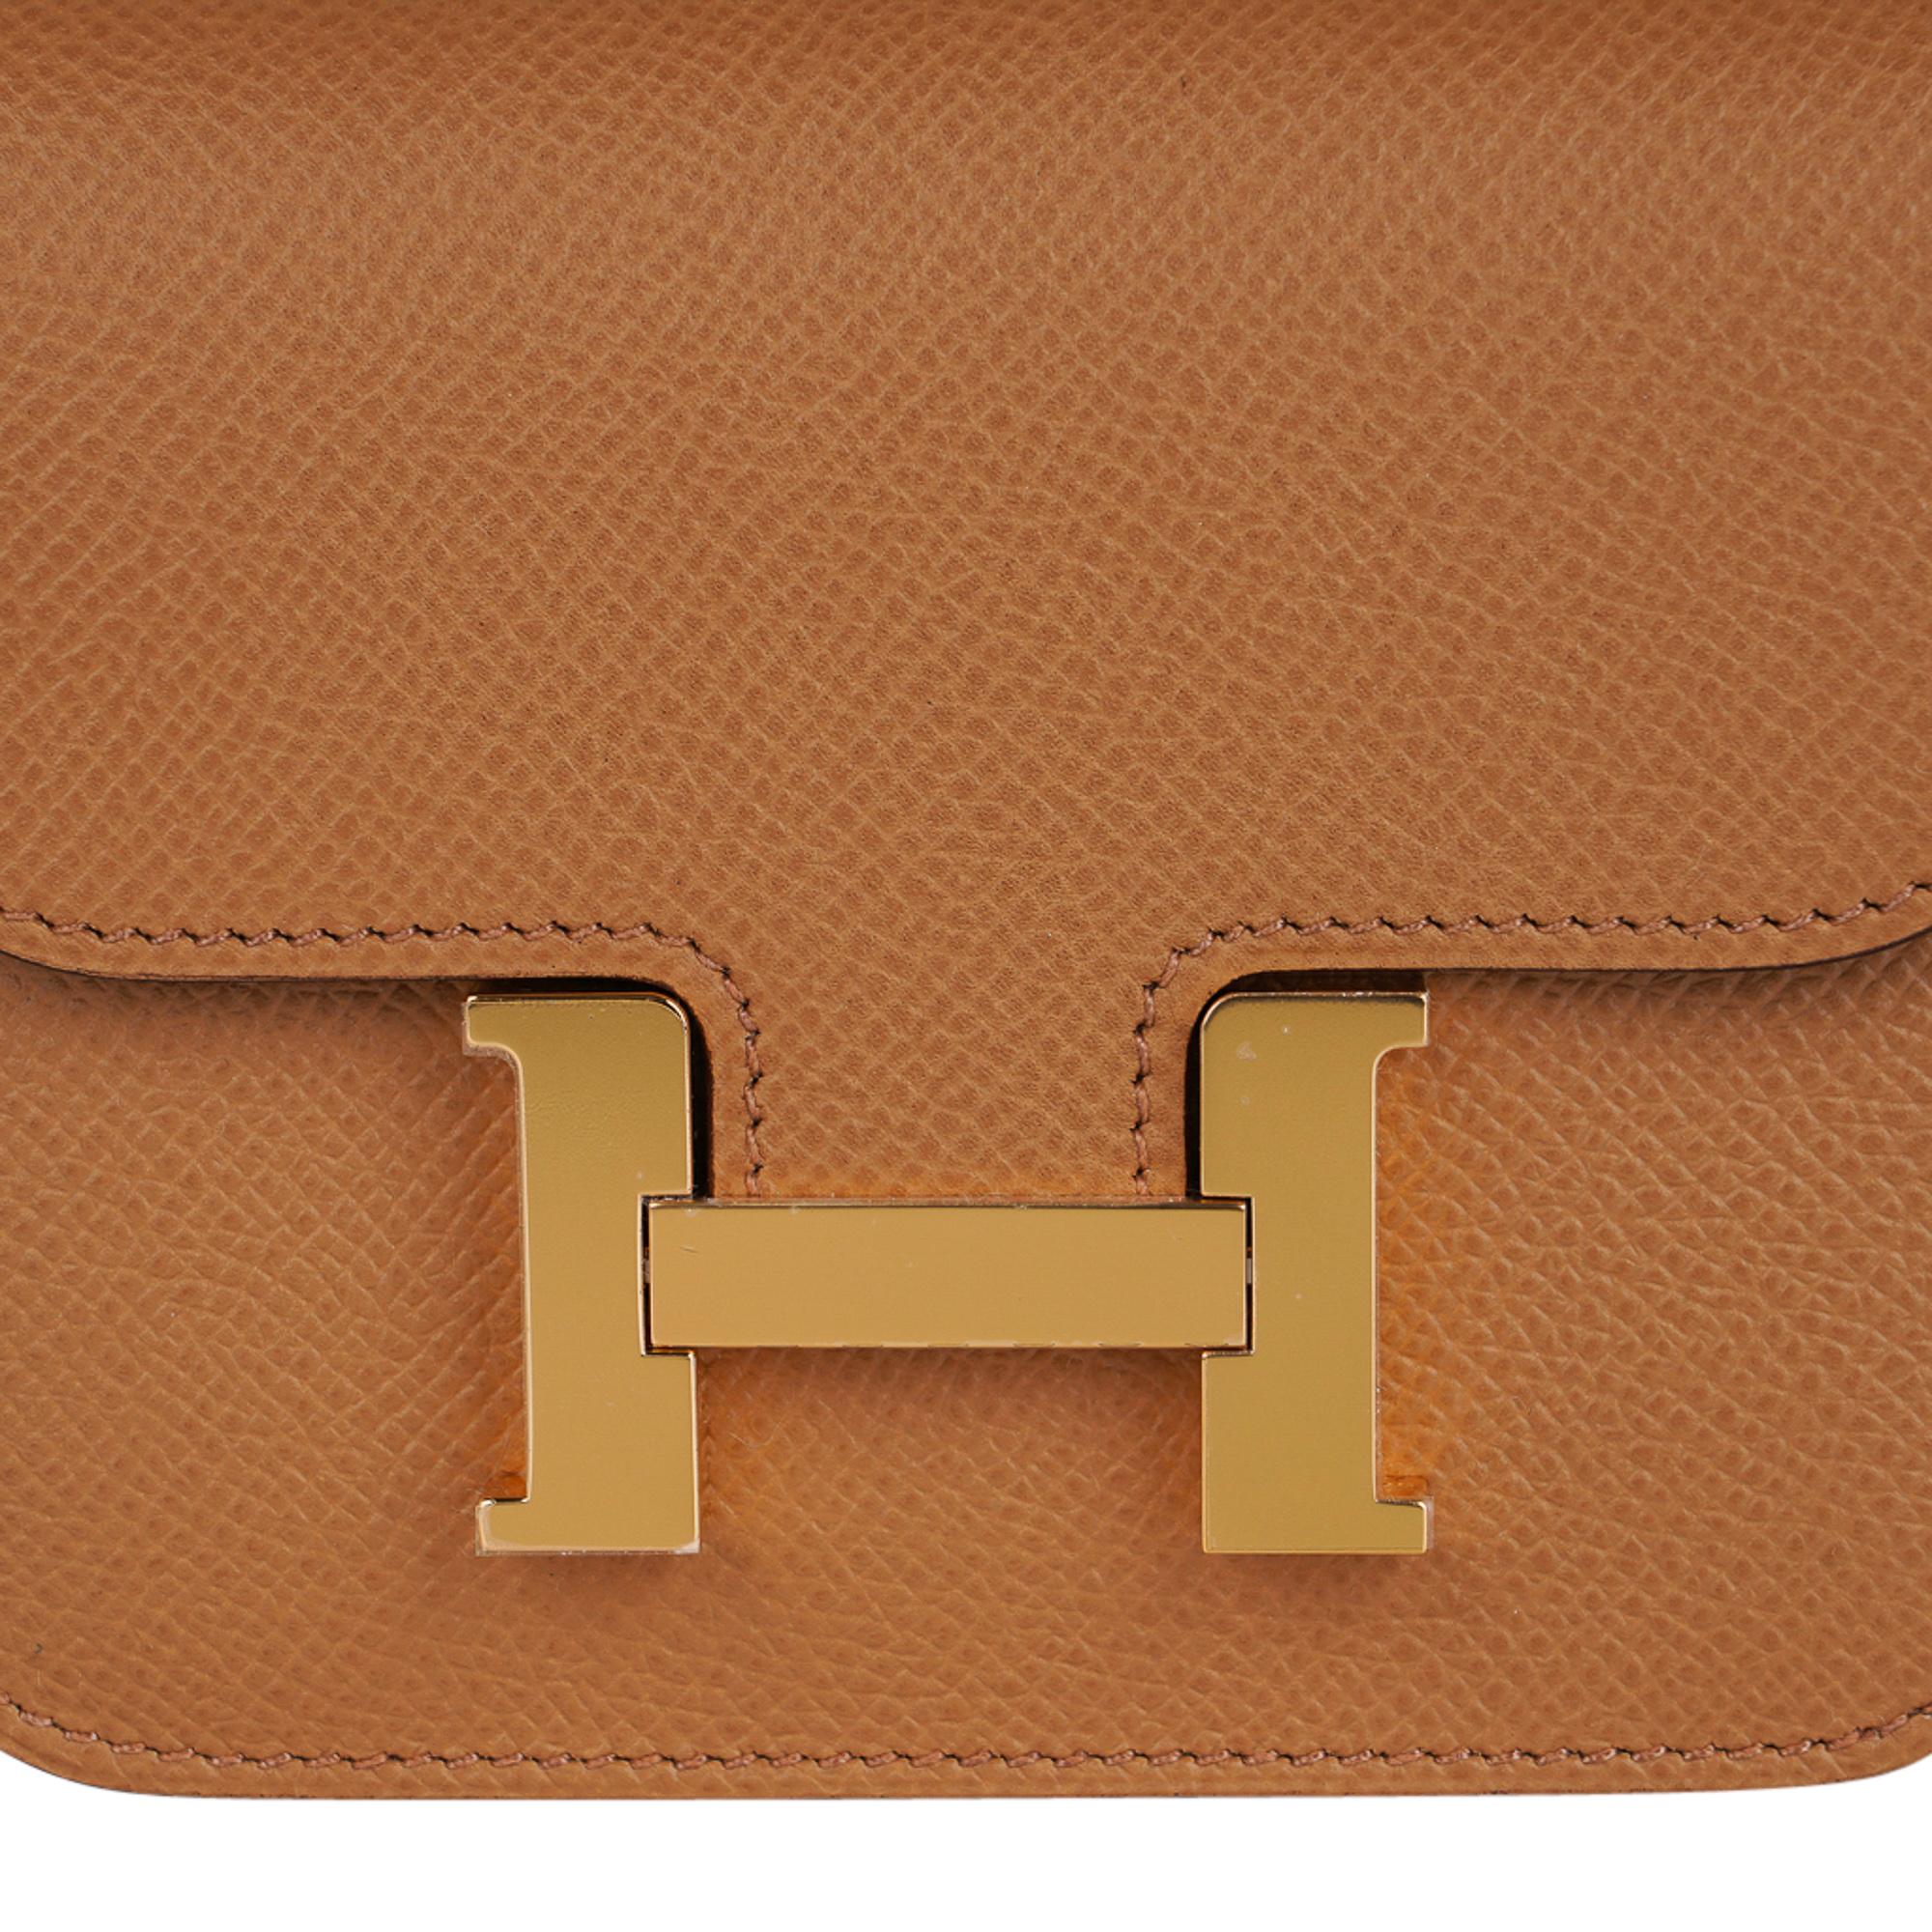 Mightychic offers a guaranteed authentic Hermes Constance Slim Wallet Belt bag featured in warm Biscuit.
This Hermes wallet is stunning with coveted Gold hardware in epsom leather.
Includes removable zipped change purse and 2 credit card slots.
Rear